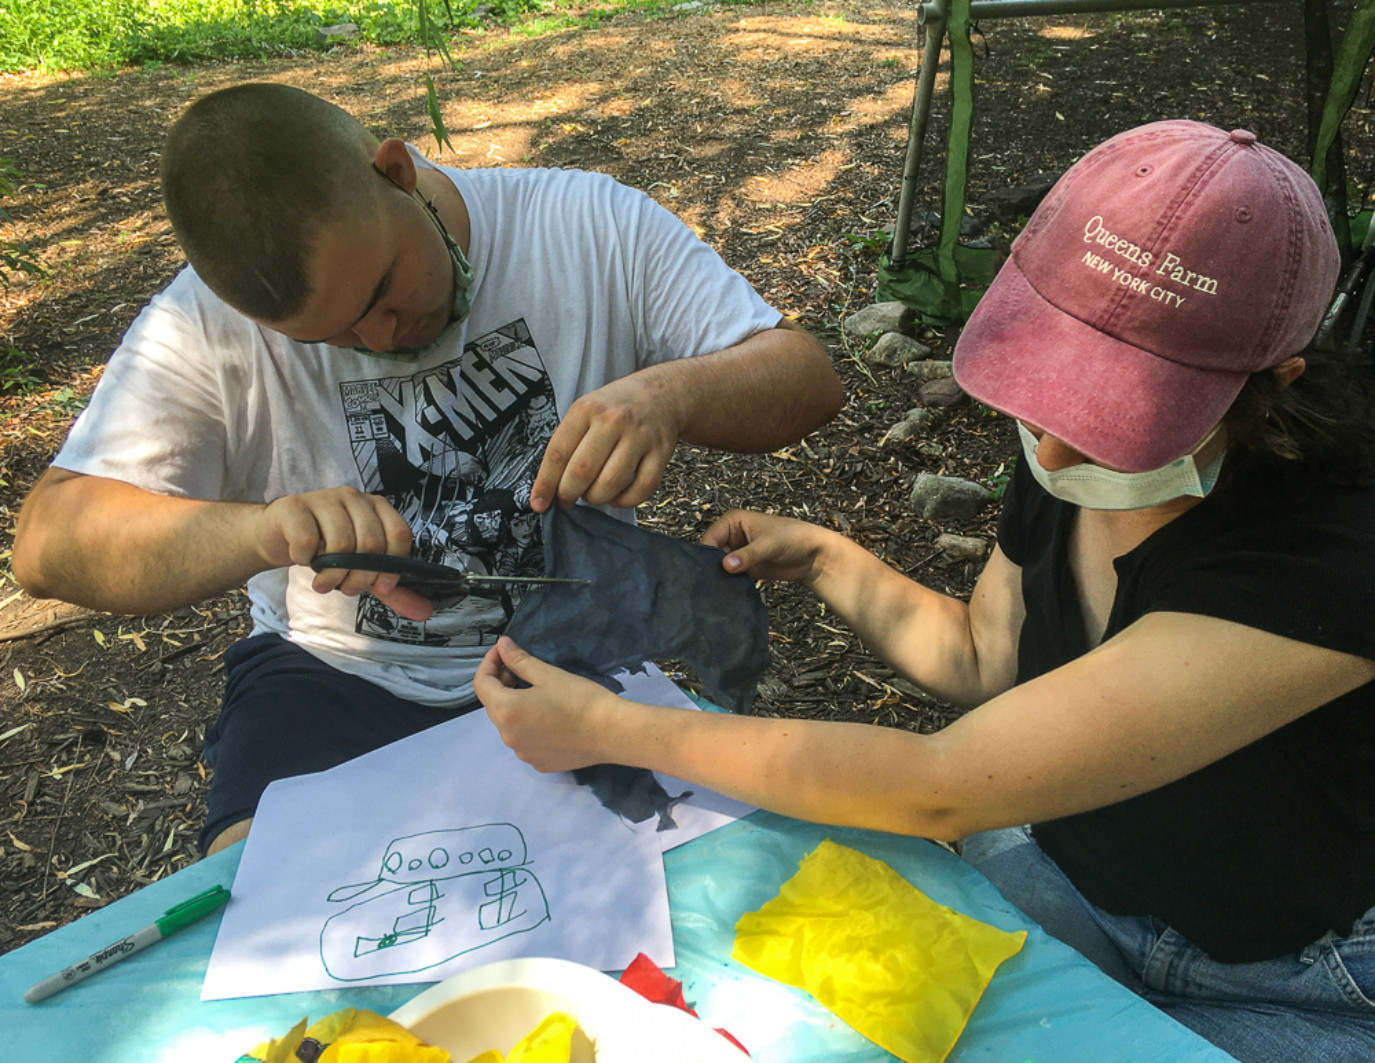 Two volunteers are working together to create a part of the Puppet. One person is holding a piece of black fabric, (she wears a red hat), while the other person is cutting into the fiber. They are both sitting at a white table with a sketch of the puppet and other yellow squares of material.